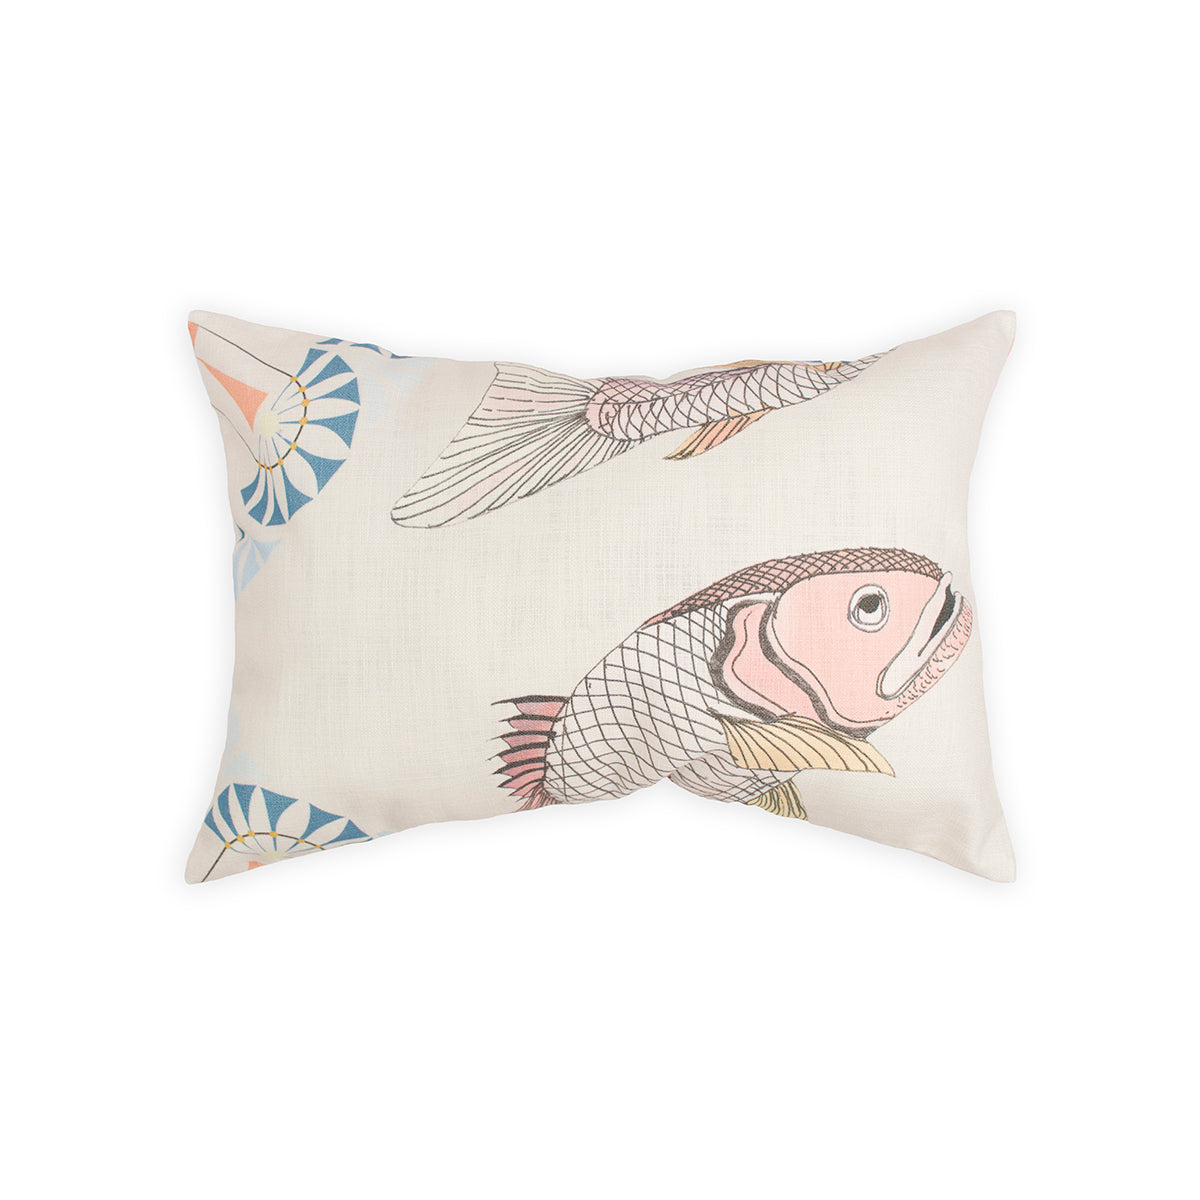 Fish Pillow Cover - George Brown College